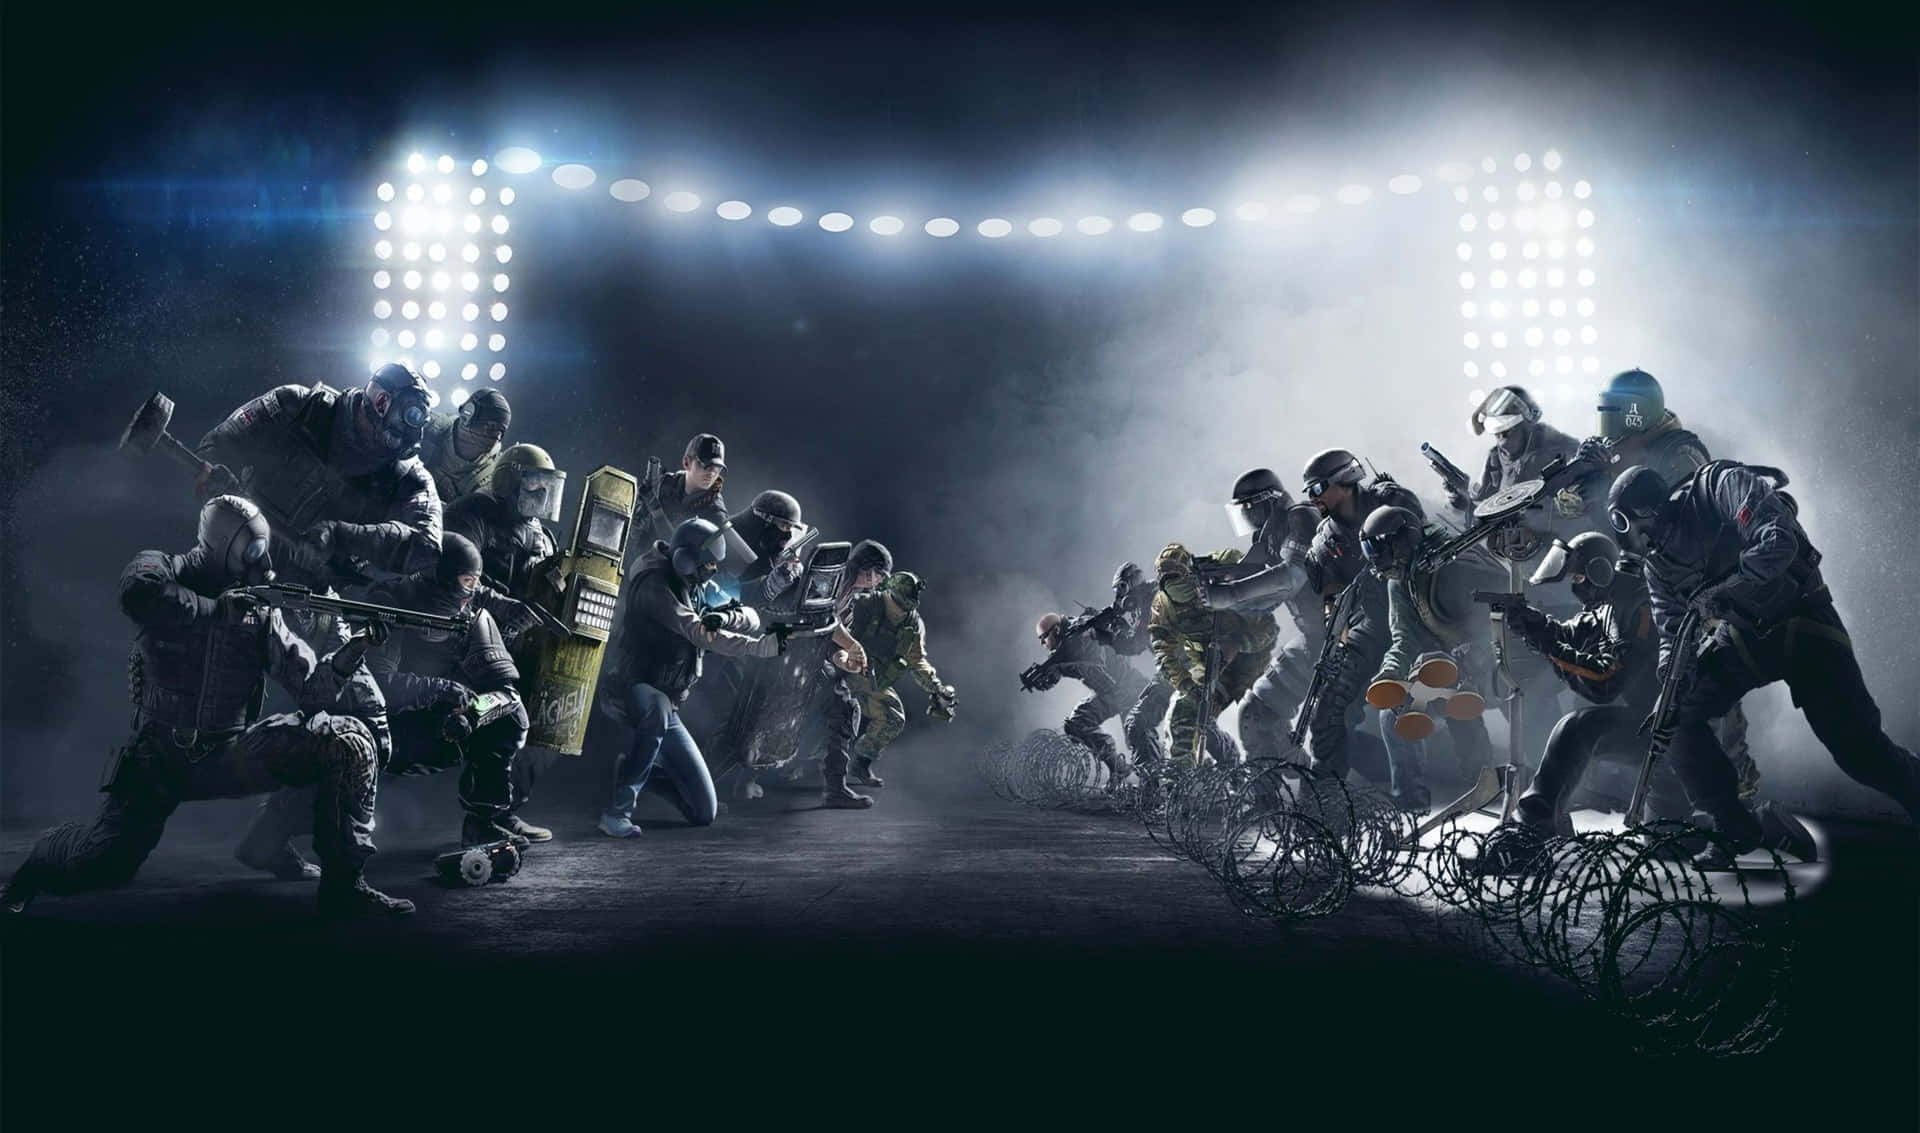 Get Ready for an Epic Battle in Rainbow Six Siege